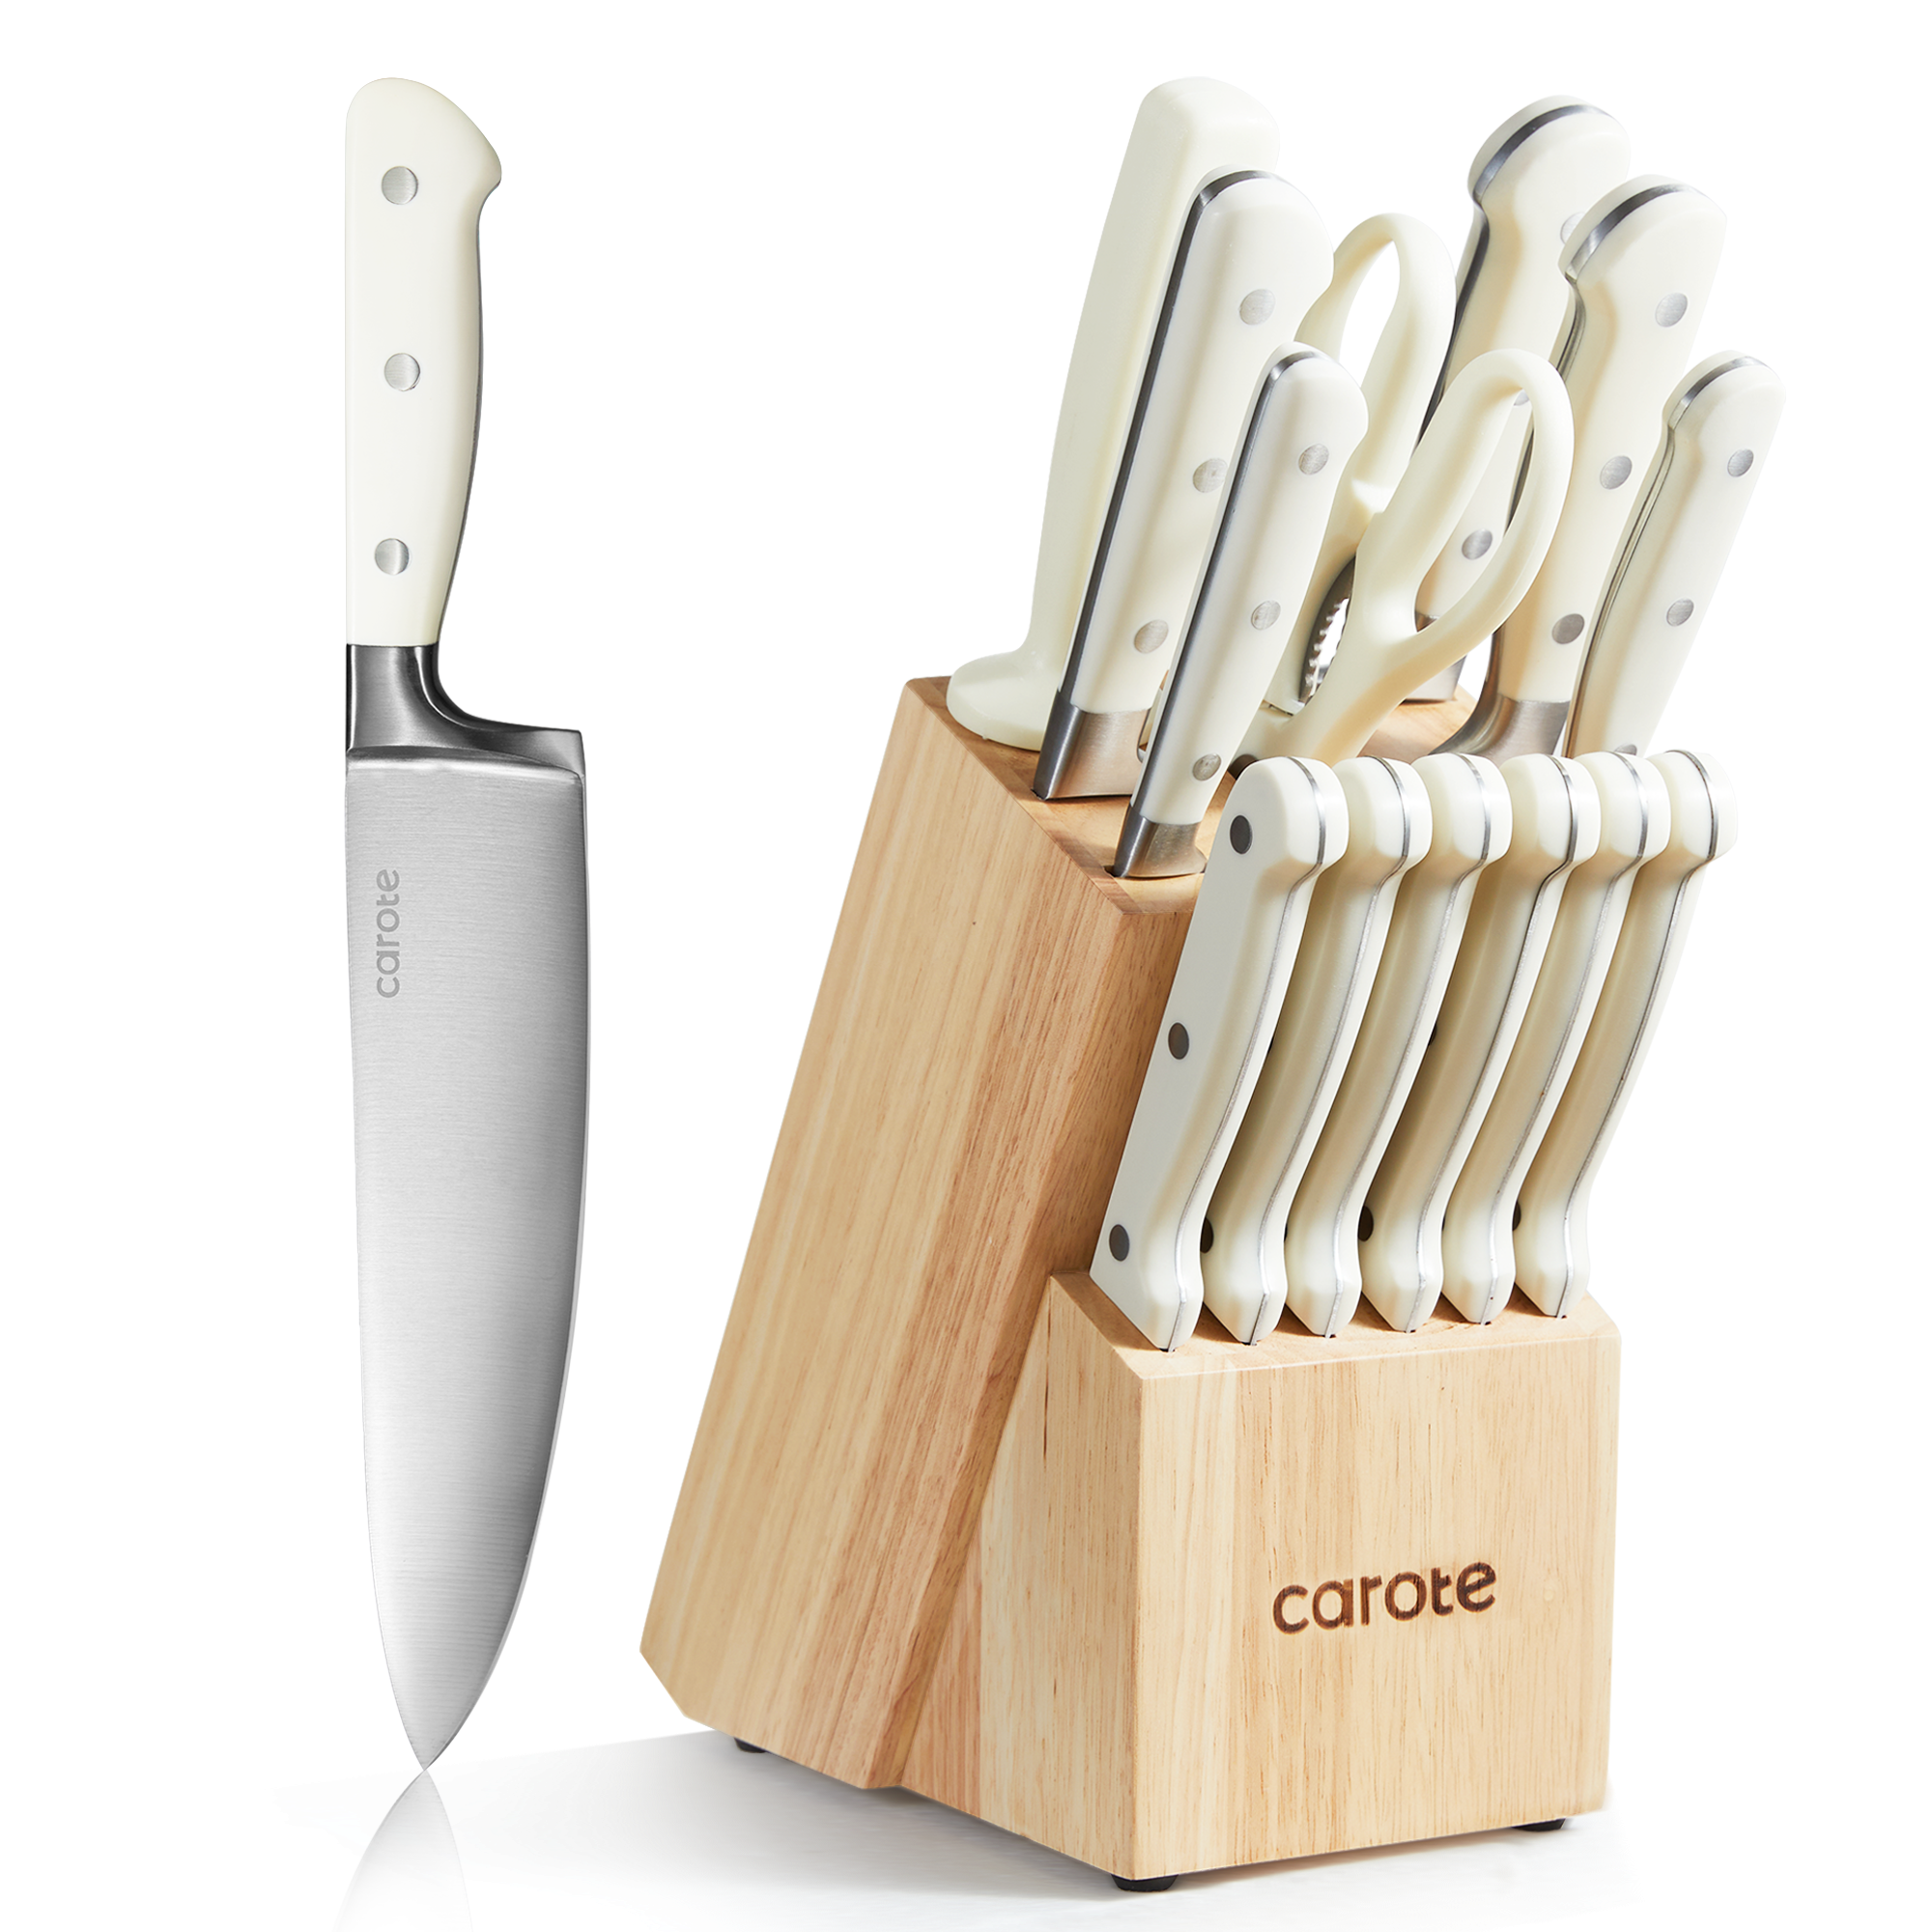 CAROTE 14 Pieces Knife Set with Wooden Block Stainless Steel Knives Dishwasher Safe with Sharp Blade Ergonomic Handle Forged Triple Rivet-Pearl White - image 1 of 6